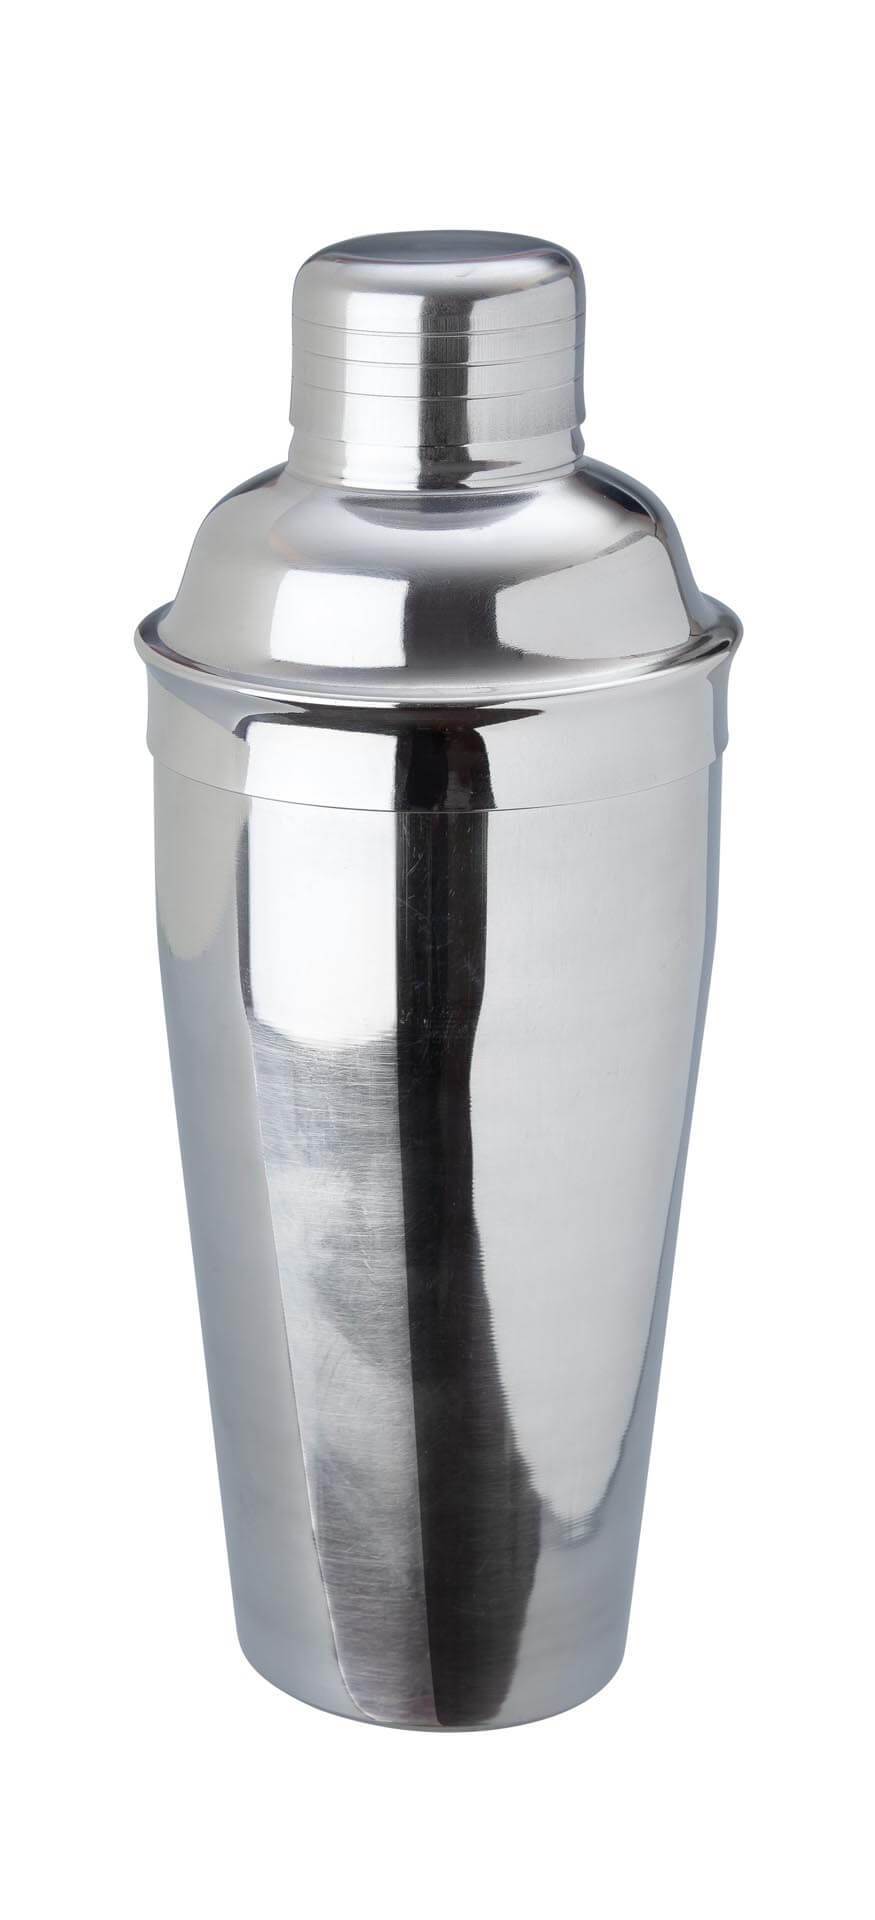 BEAUMONT 750ml DELUXE COCKTAIL SHAKERBAR-3583